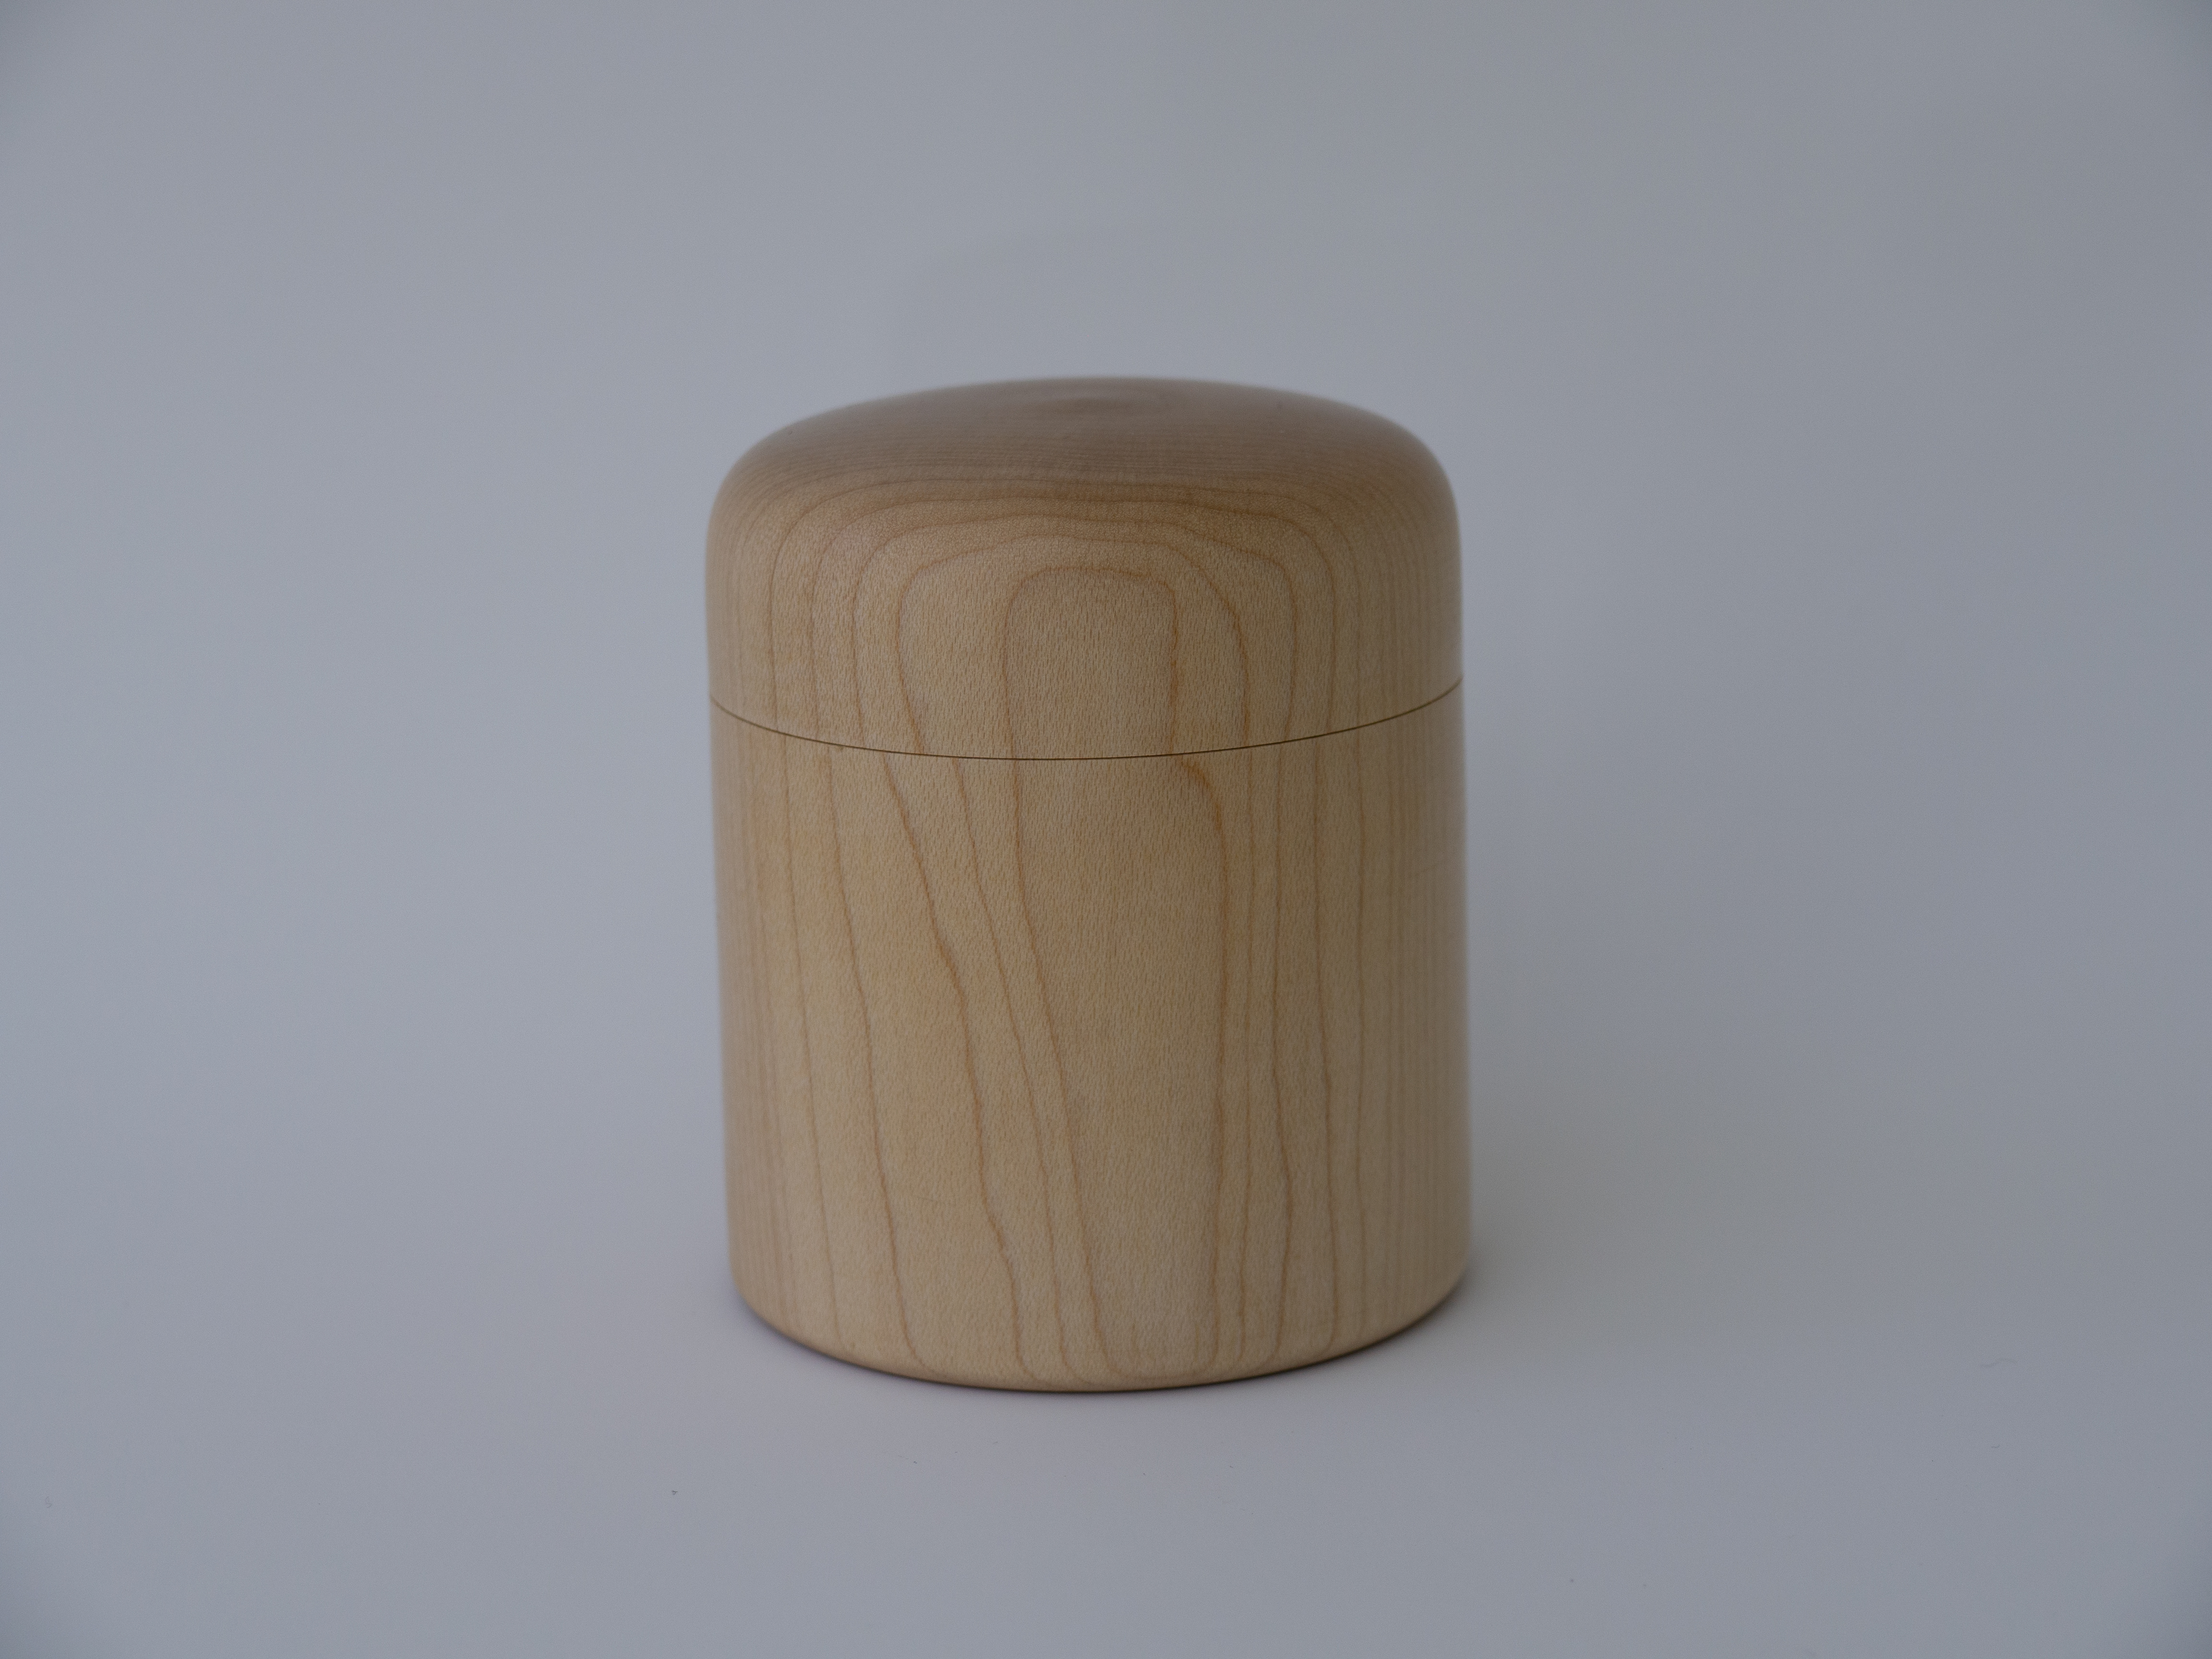 a small lidded box of wood on a white background